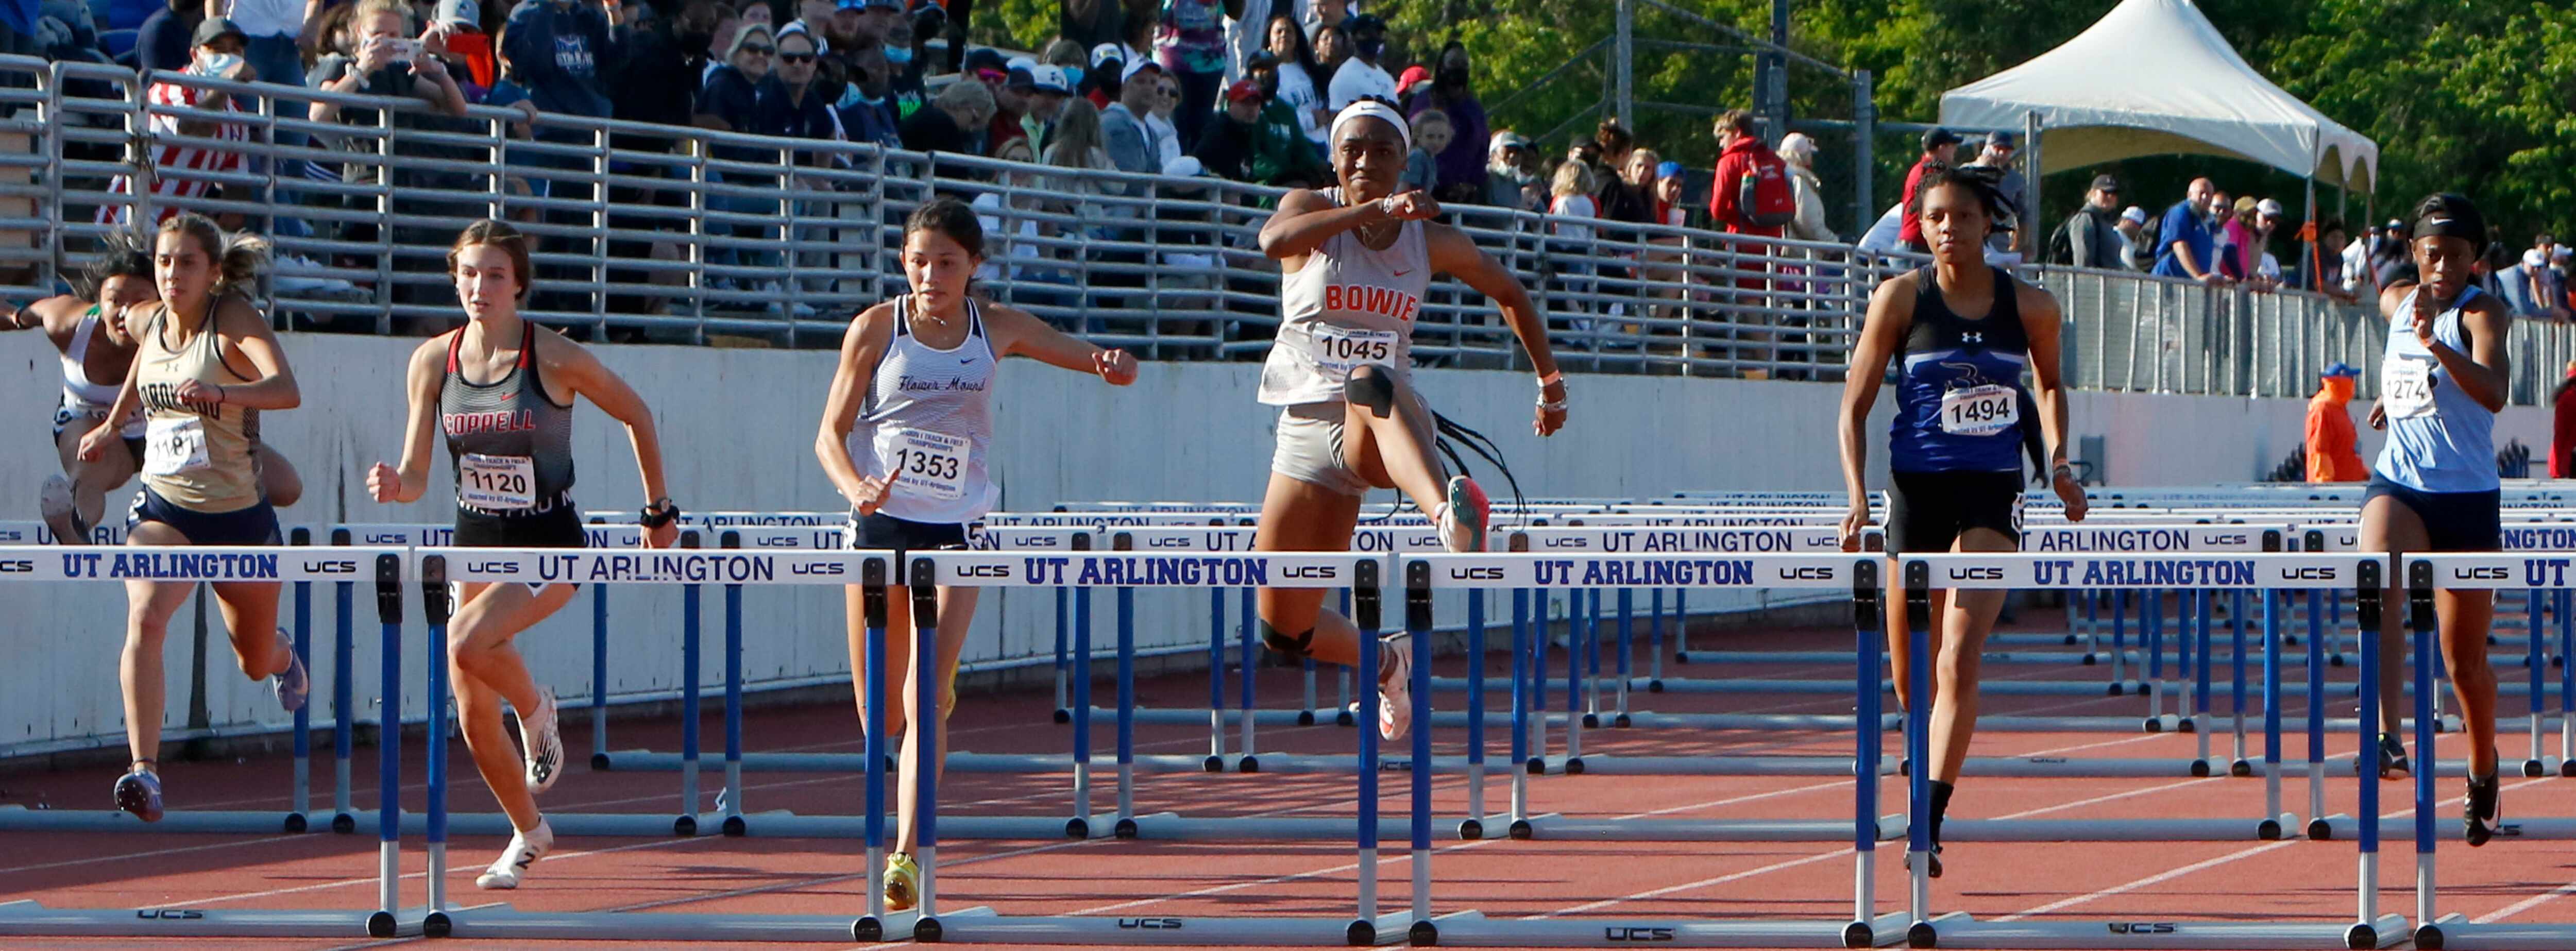 Arlington Bowie's Janet Nkwoparah, center, clears the final hurdle on her way to win the...